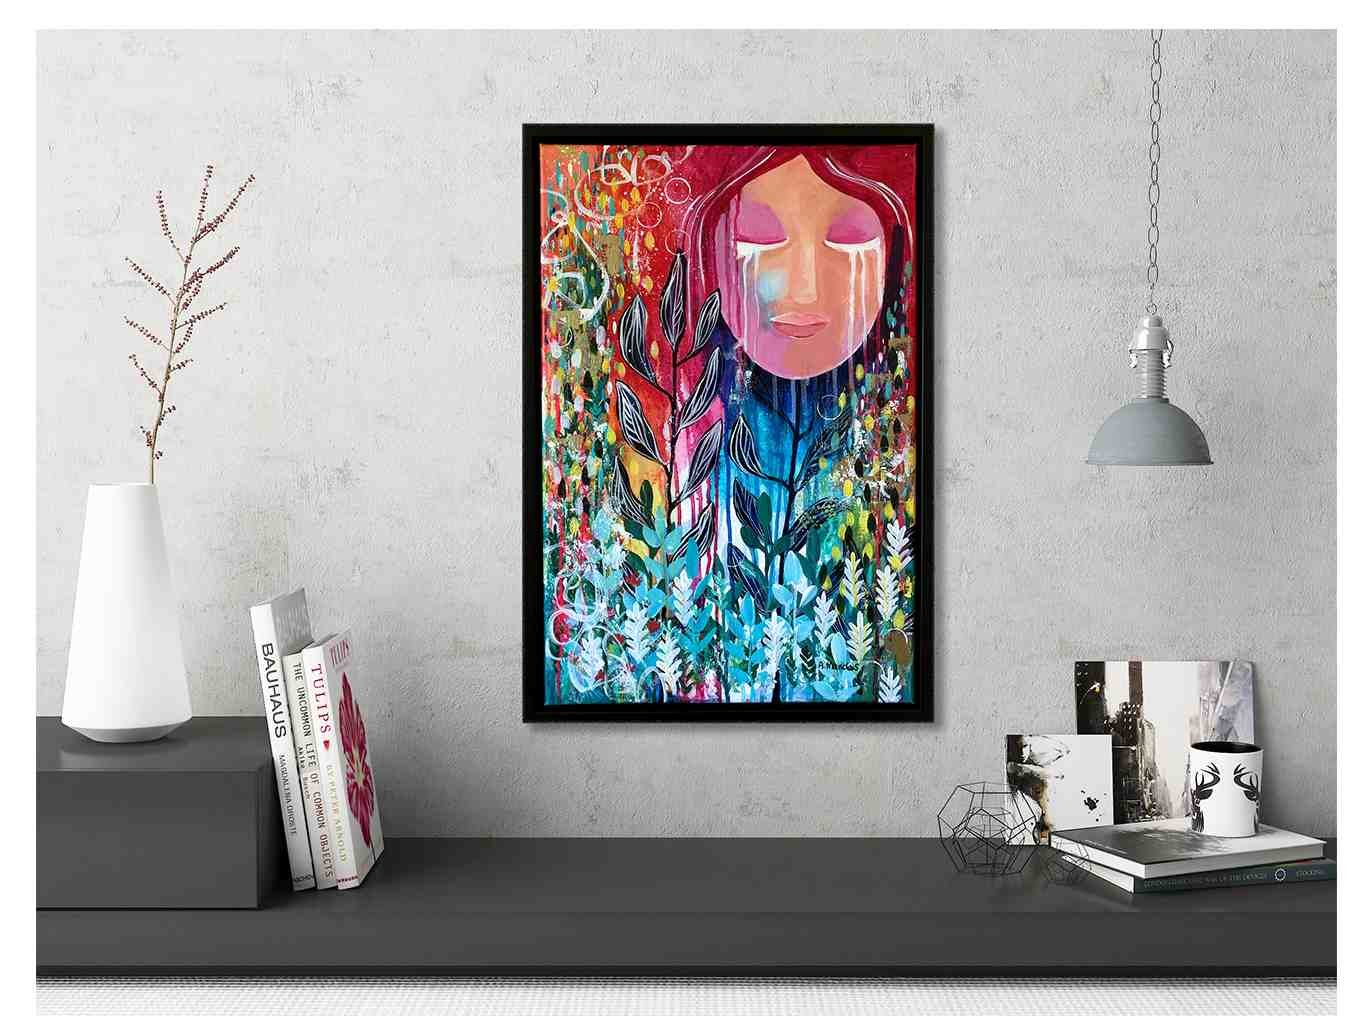 AM 110 The Warden black - floater - frame - Audree Marsoloais - acrylic - painting - canvas - face - nature - colorful - art - decor (2)